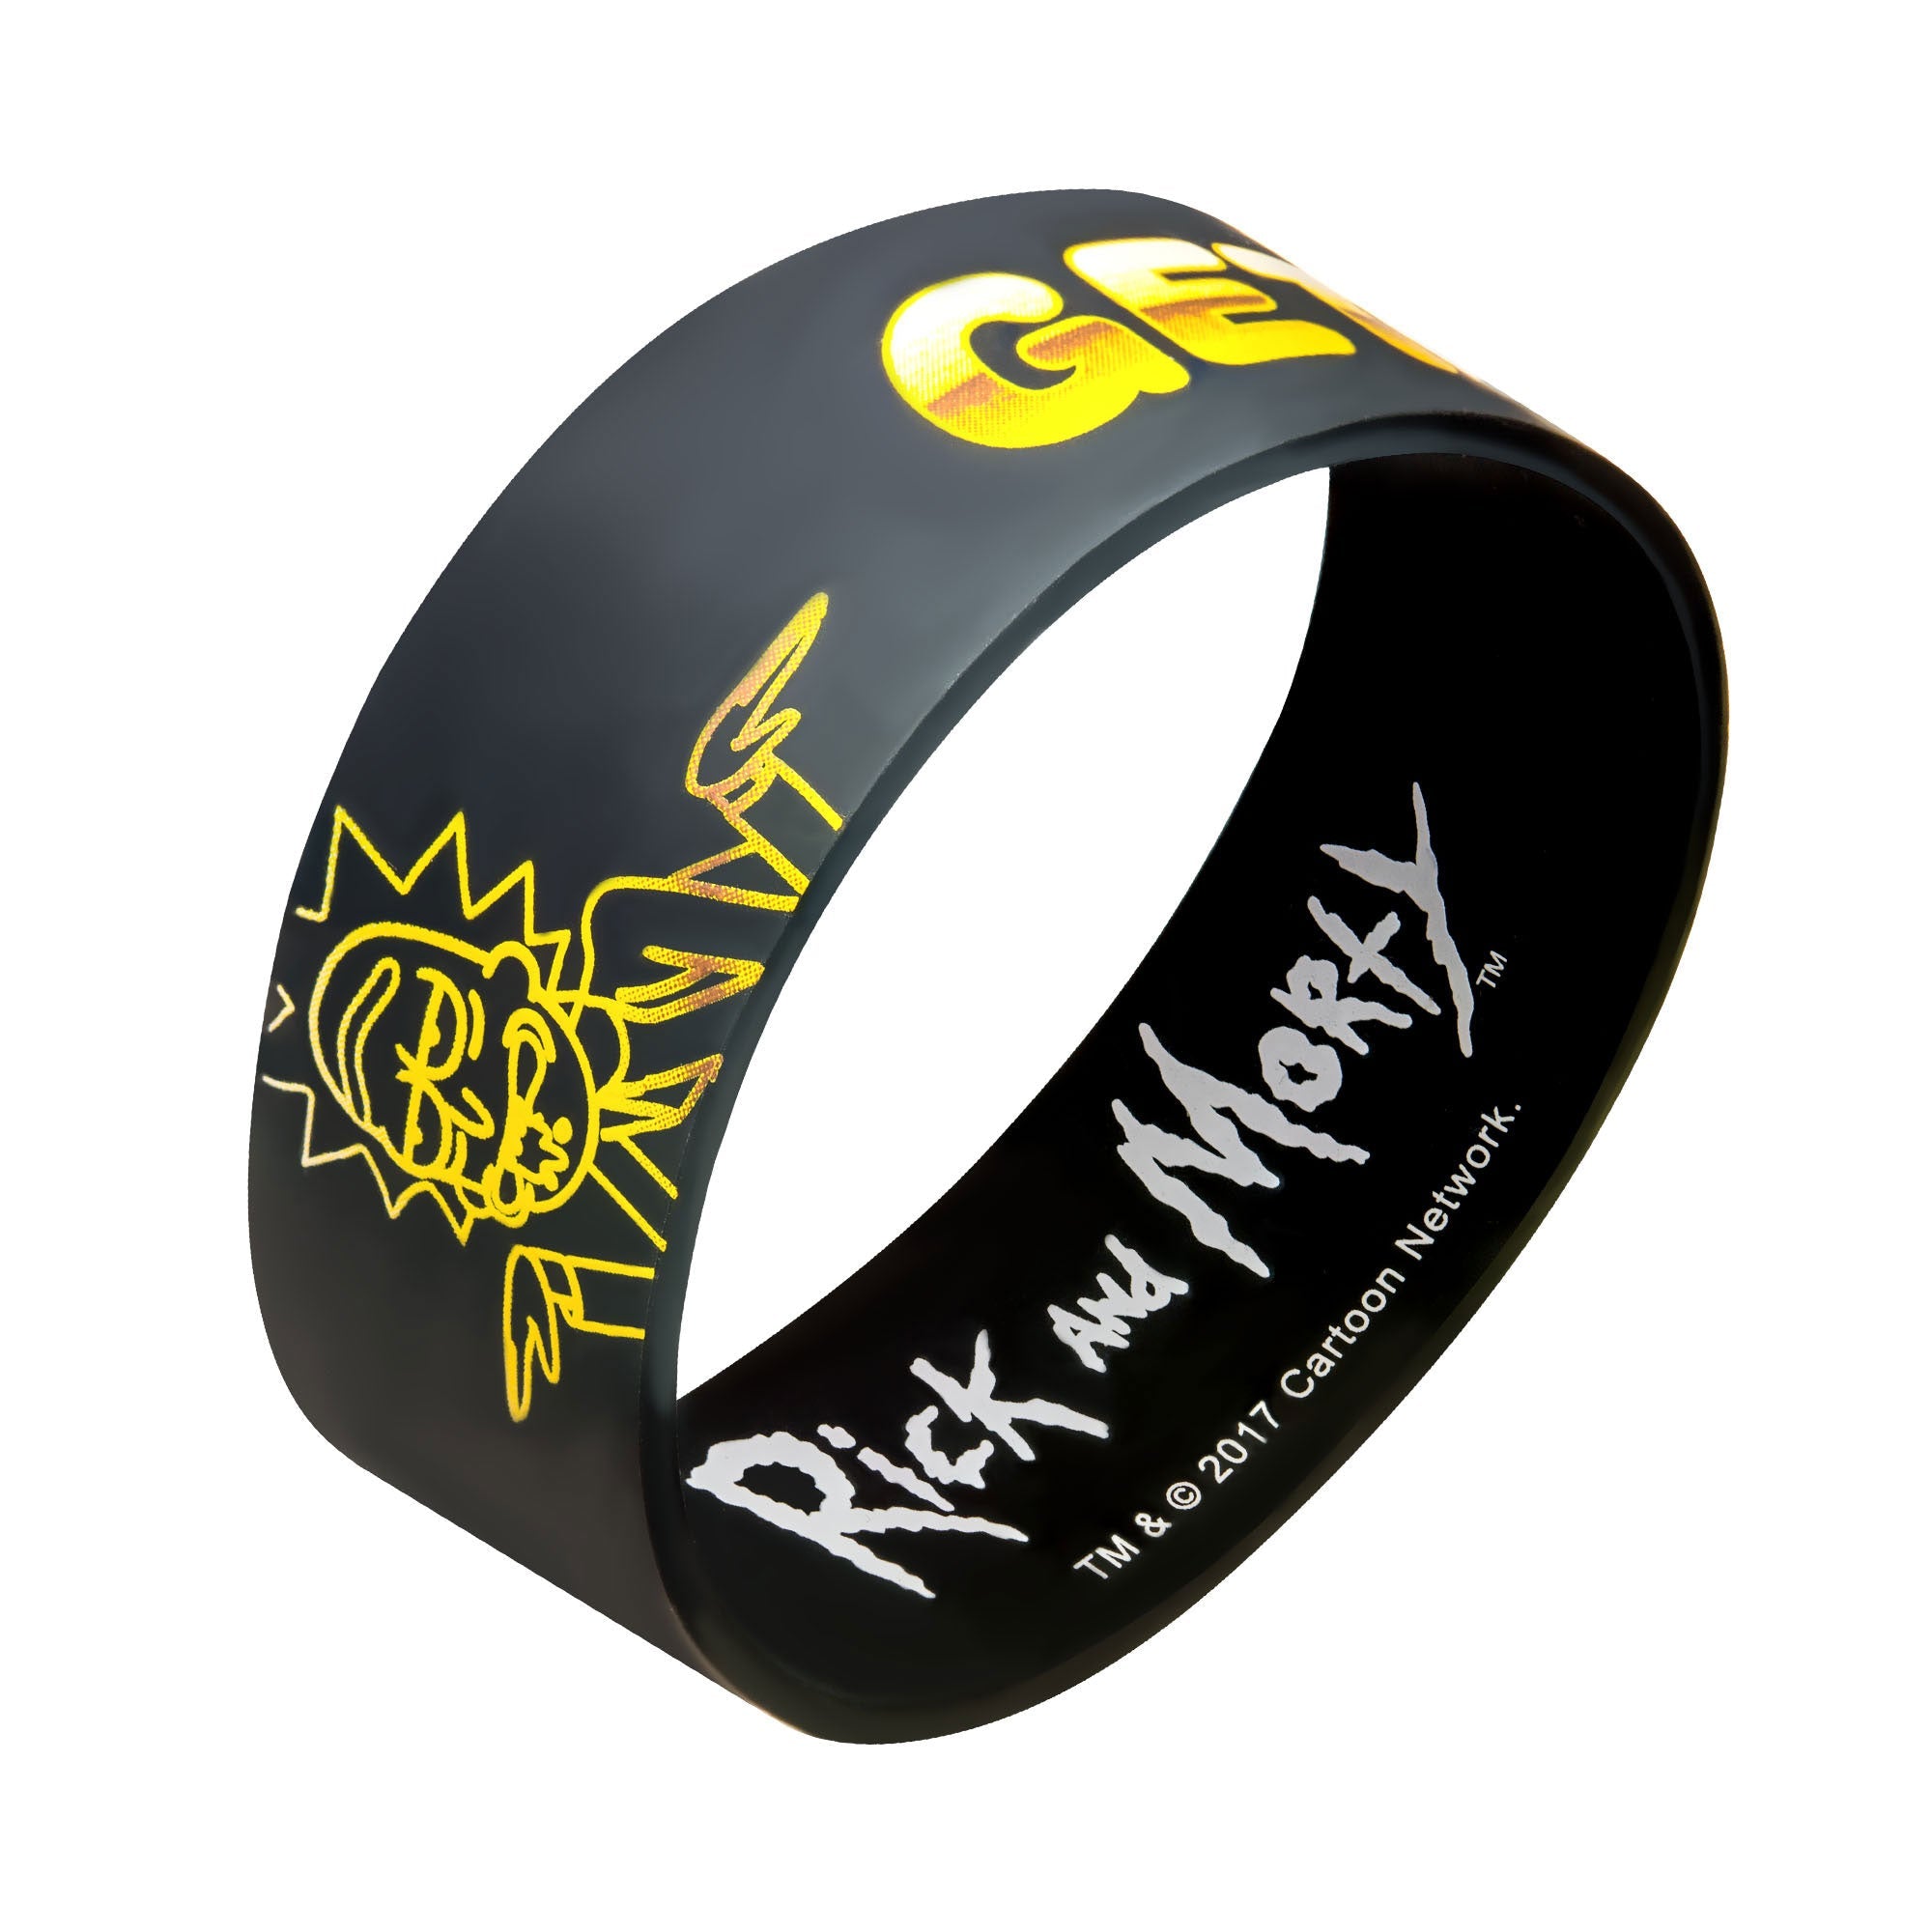 Cartoon Network Rick and Morty Rick Get Schwifty Rubber Bracelet